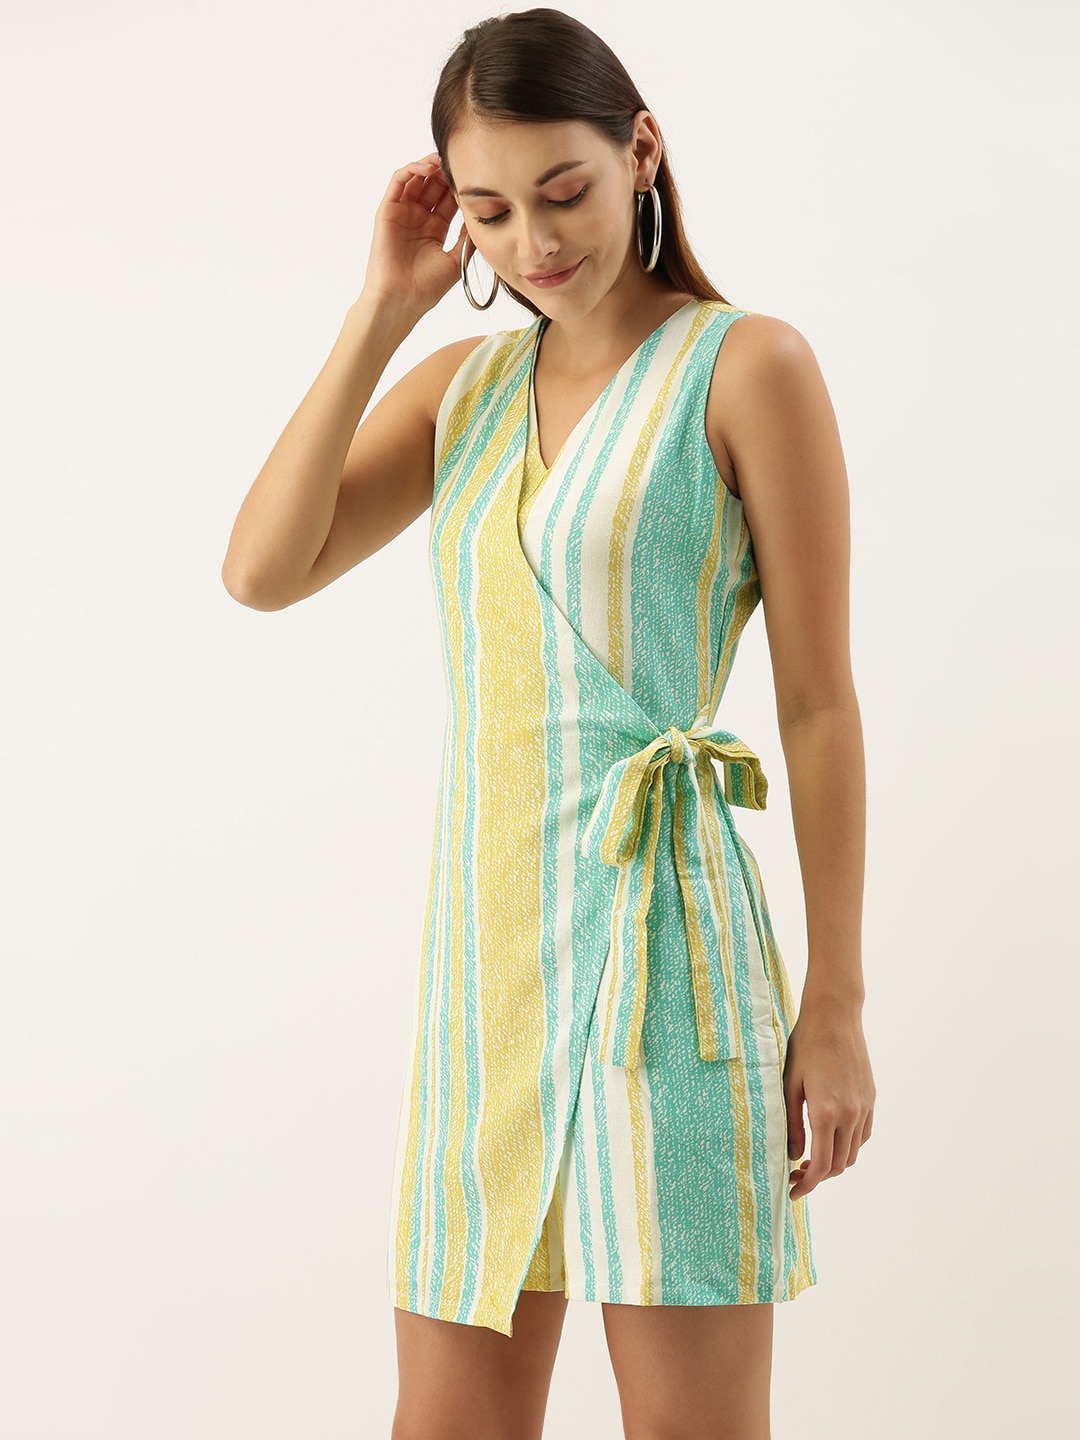 AND Women Off-White & Green Striped Playsuit With Waist Tie-Ups Price in India